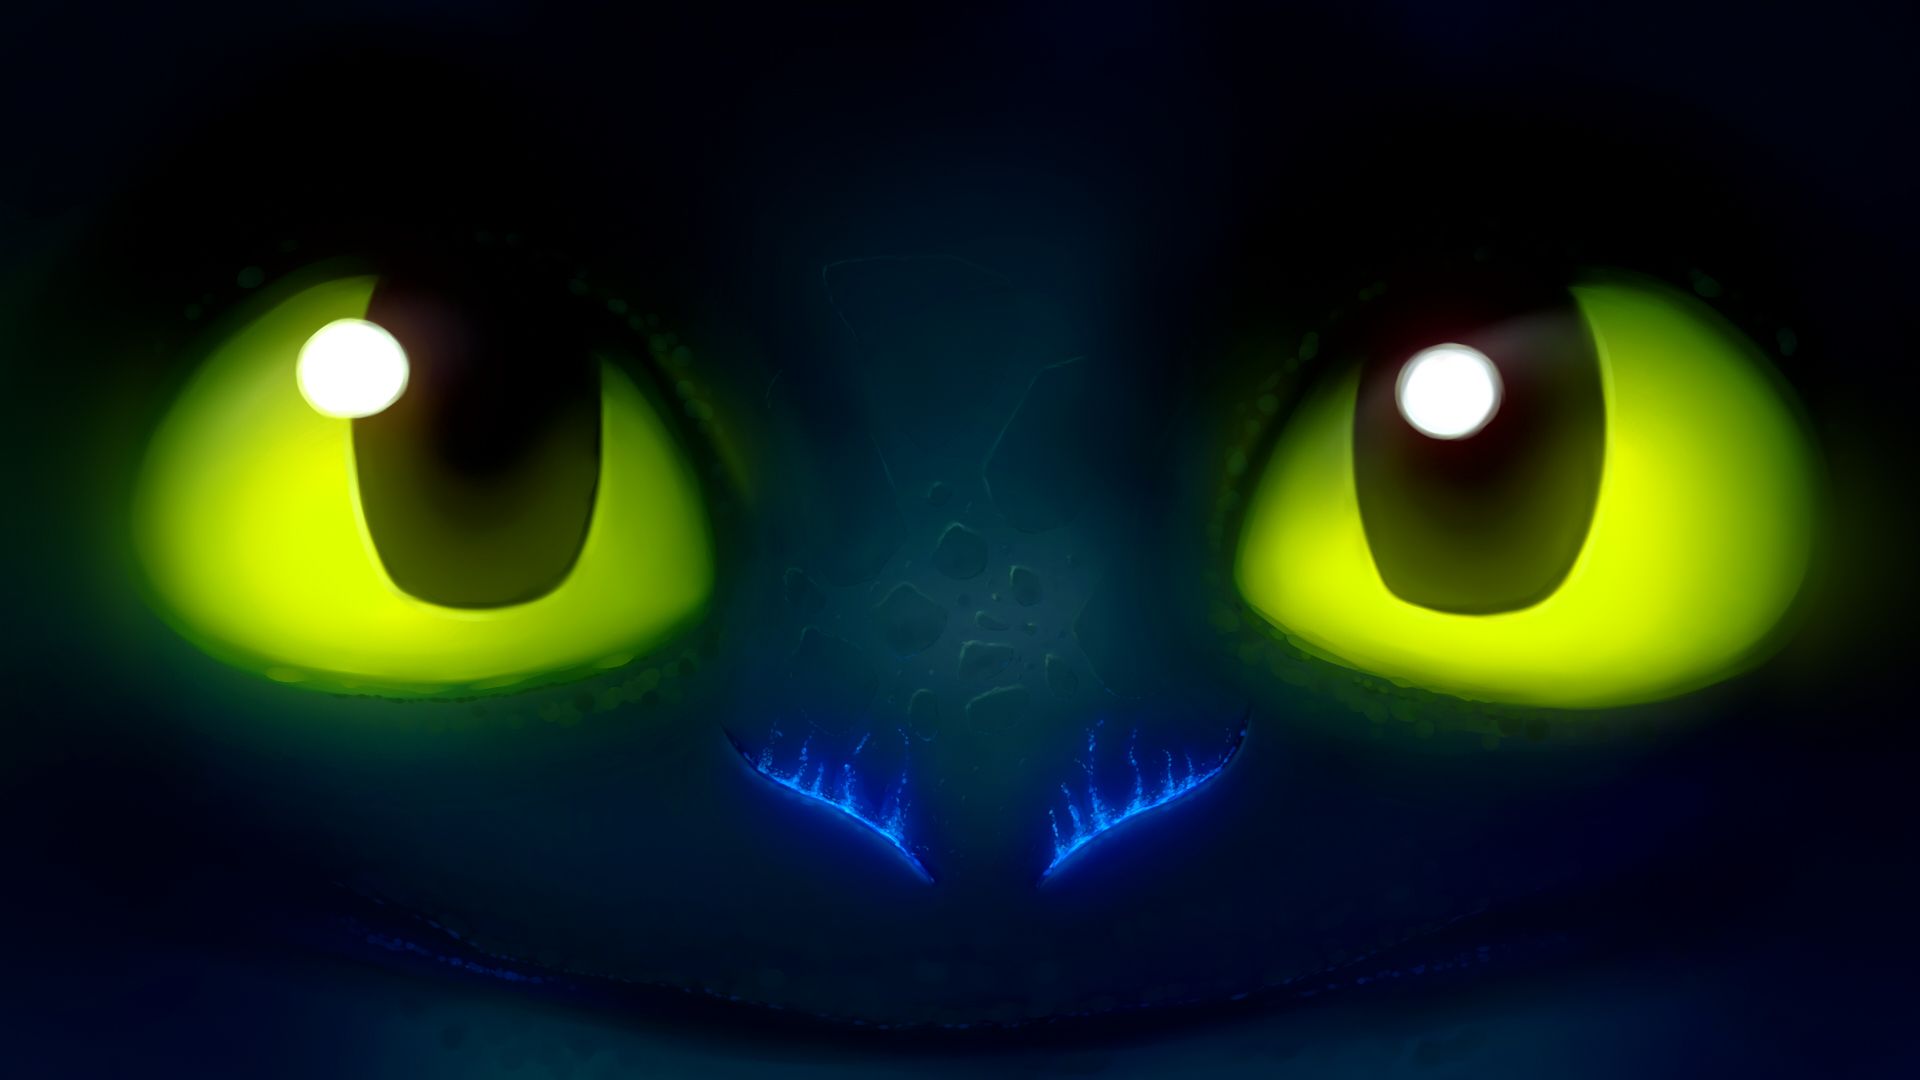 Toothless Wallpaper 1080p by higemouse on DeviantArt